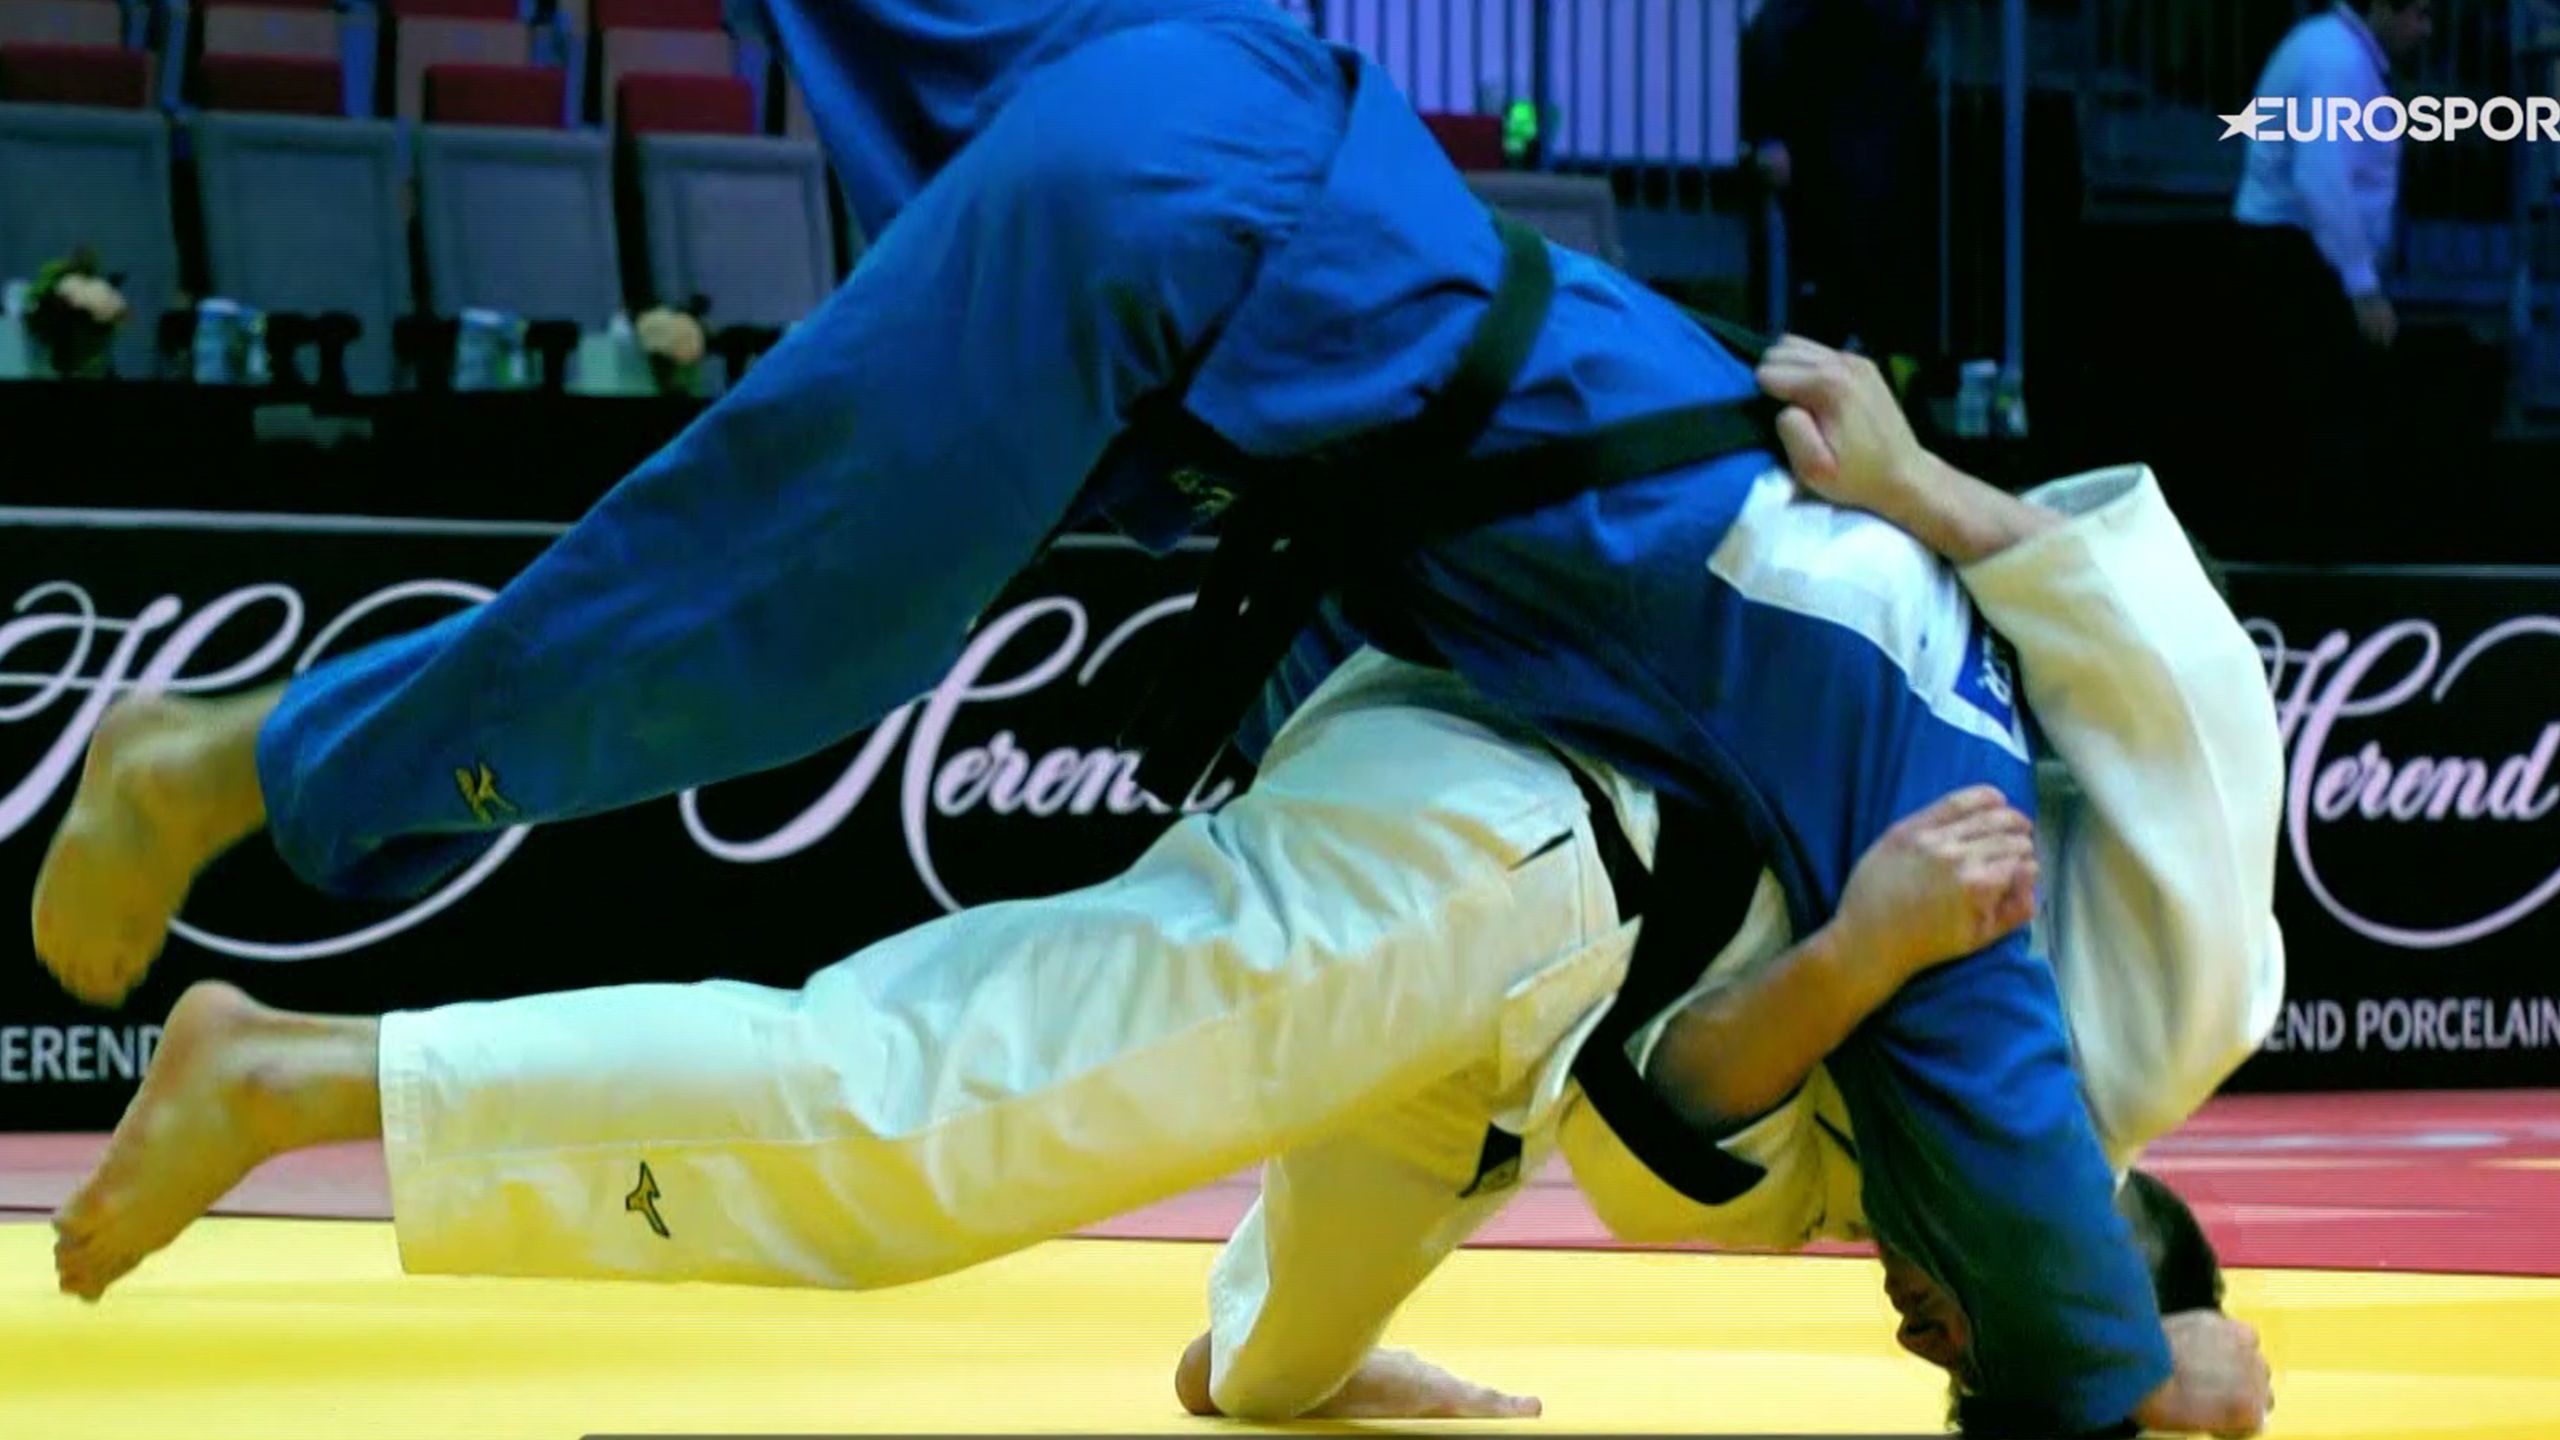 Olympic video - How judo hopefuls can qualify for Tokyo 2020 - Judo video